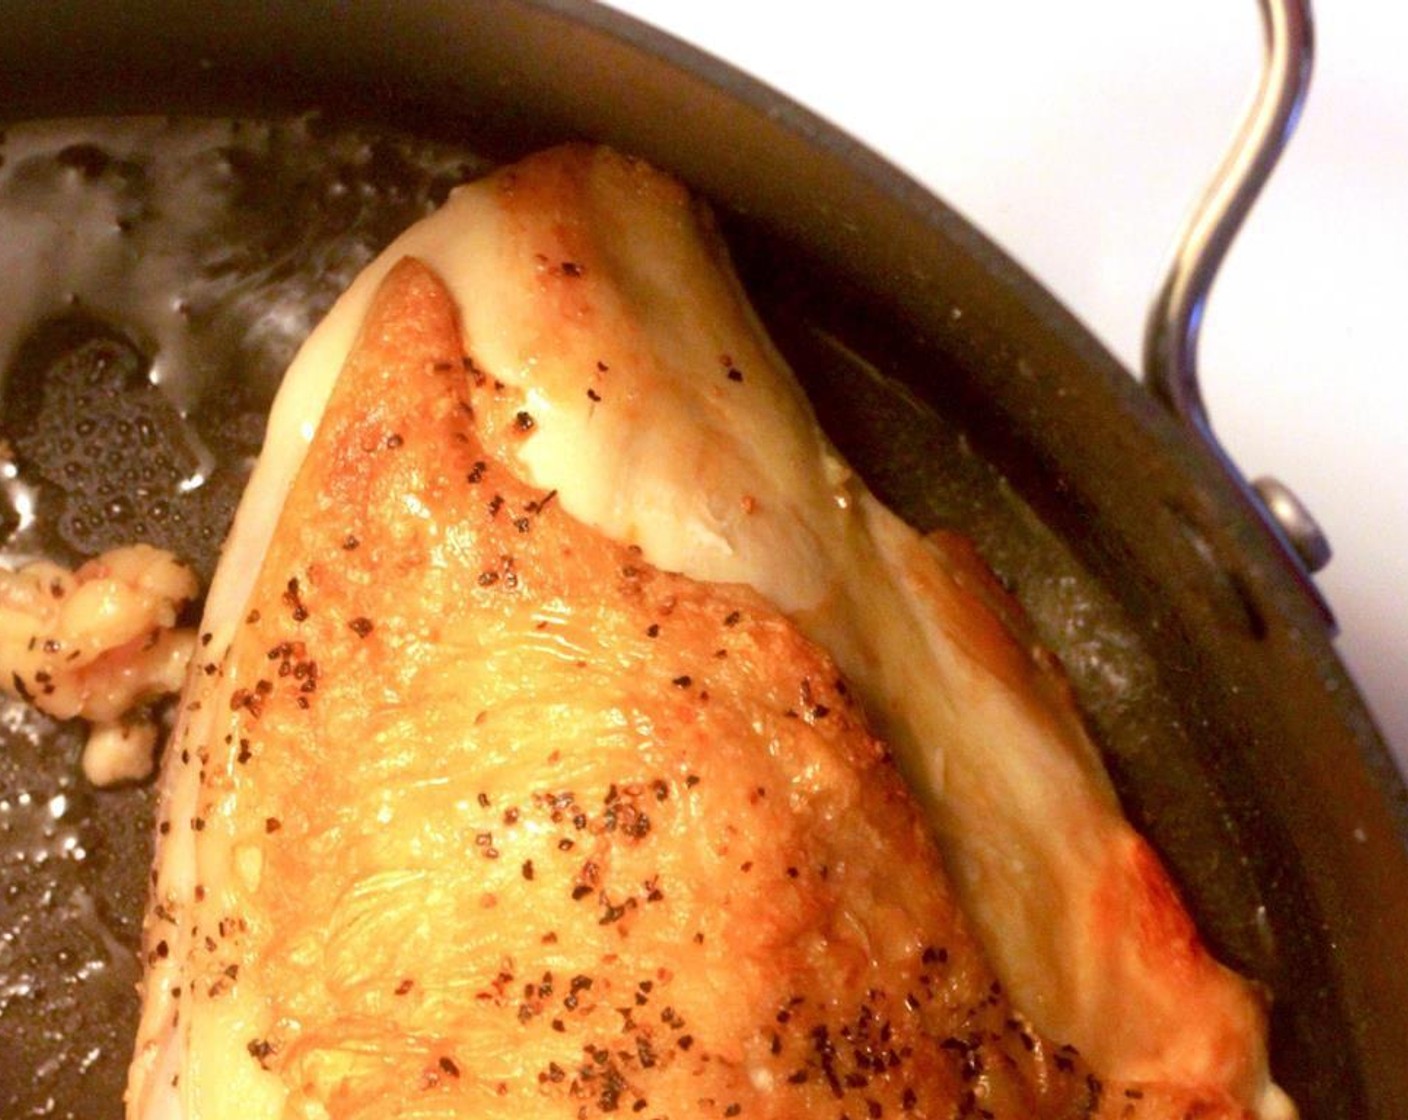 step 4 In a dutch oven or large pot without any plastic parts, heat 1 tbsp. of olive oil. Season the Bone-In Chicken Breasts (2) with salt and pepper.